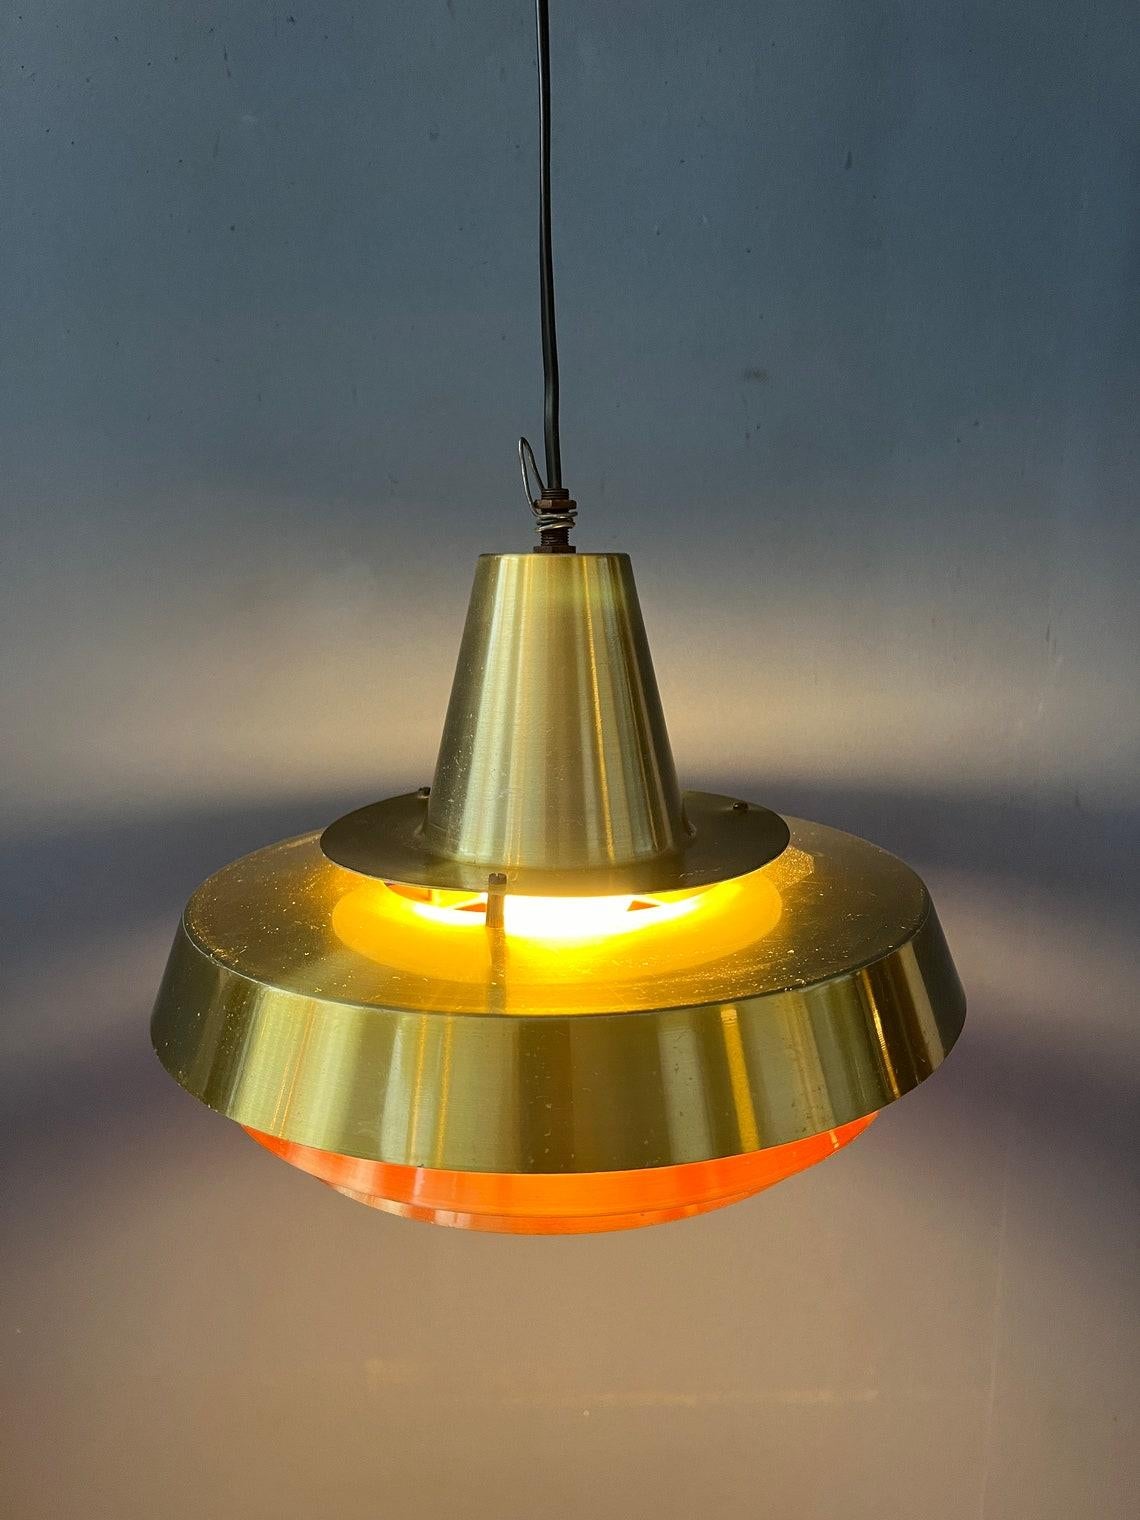 Small Danish style pendant lamp in brass colour and orange lacquer. The light reflects nicely on the orange lacquer. The lamp requires one E27/26 (standard) lightbulb.

Additional information:
Materials: Glass, metal
Period: 1970s
Dimensions:ø